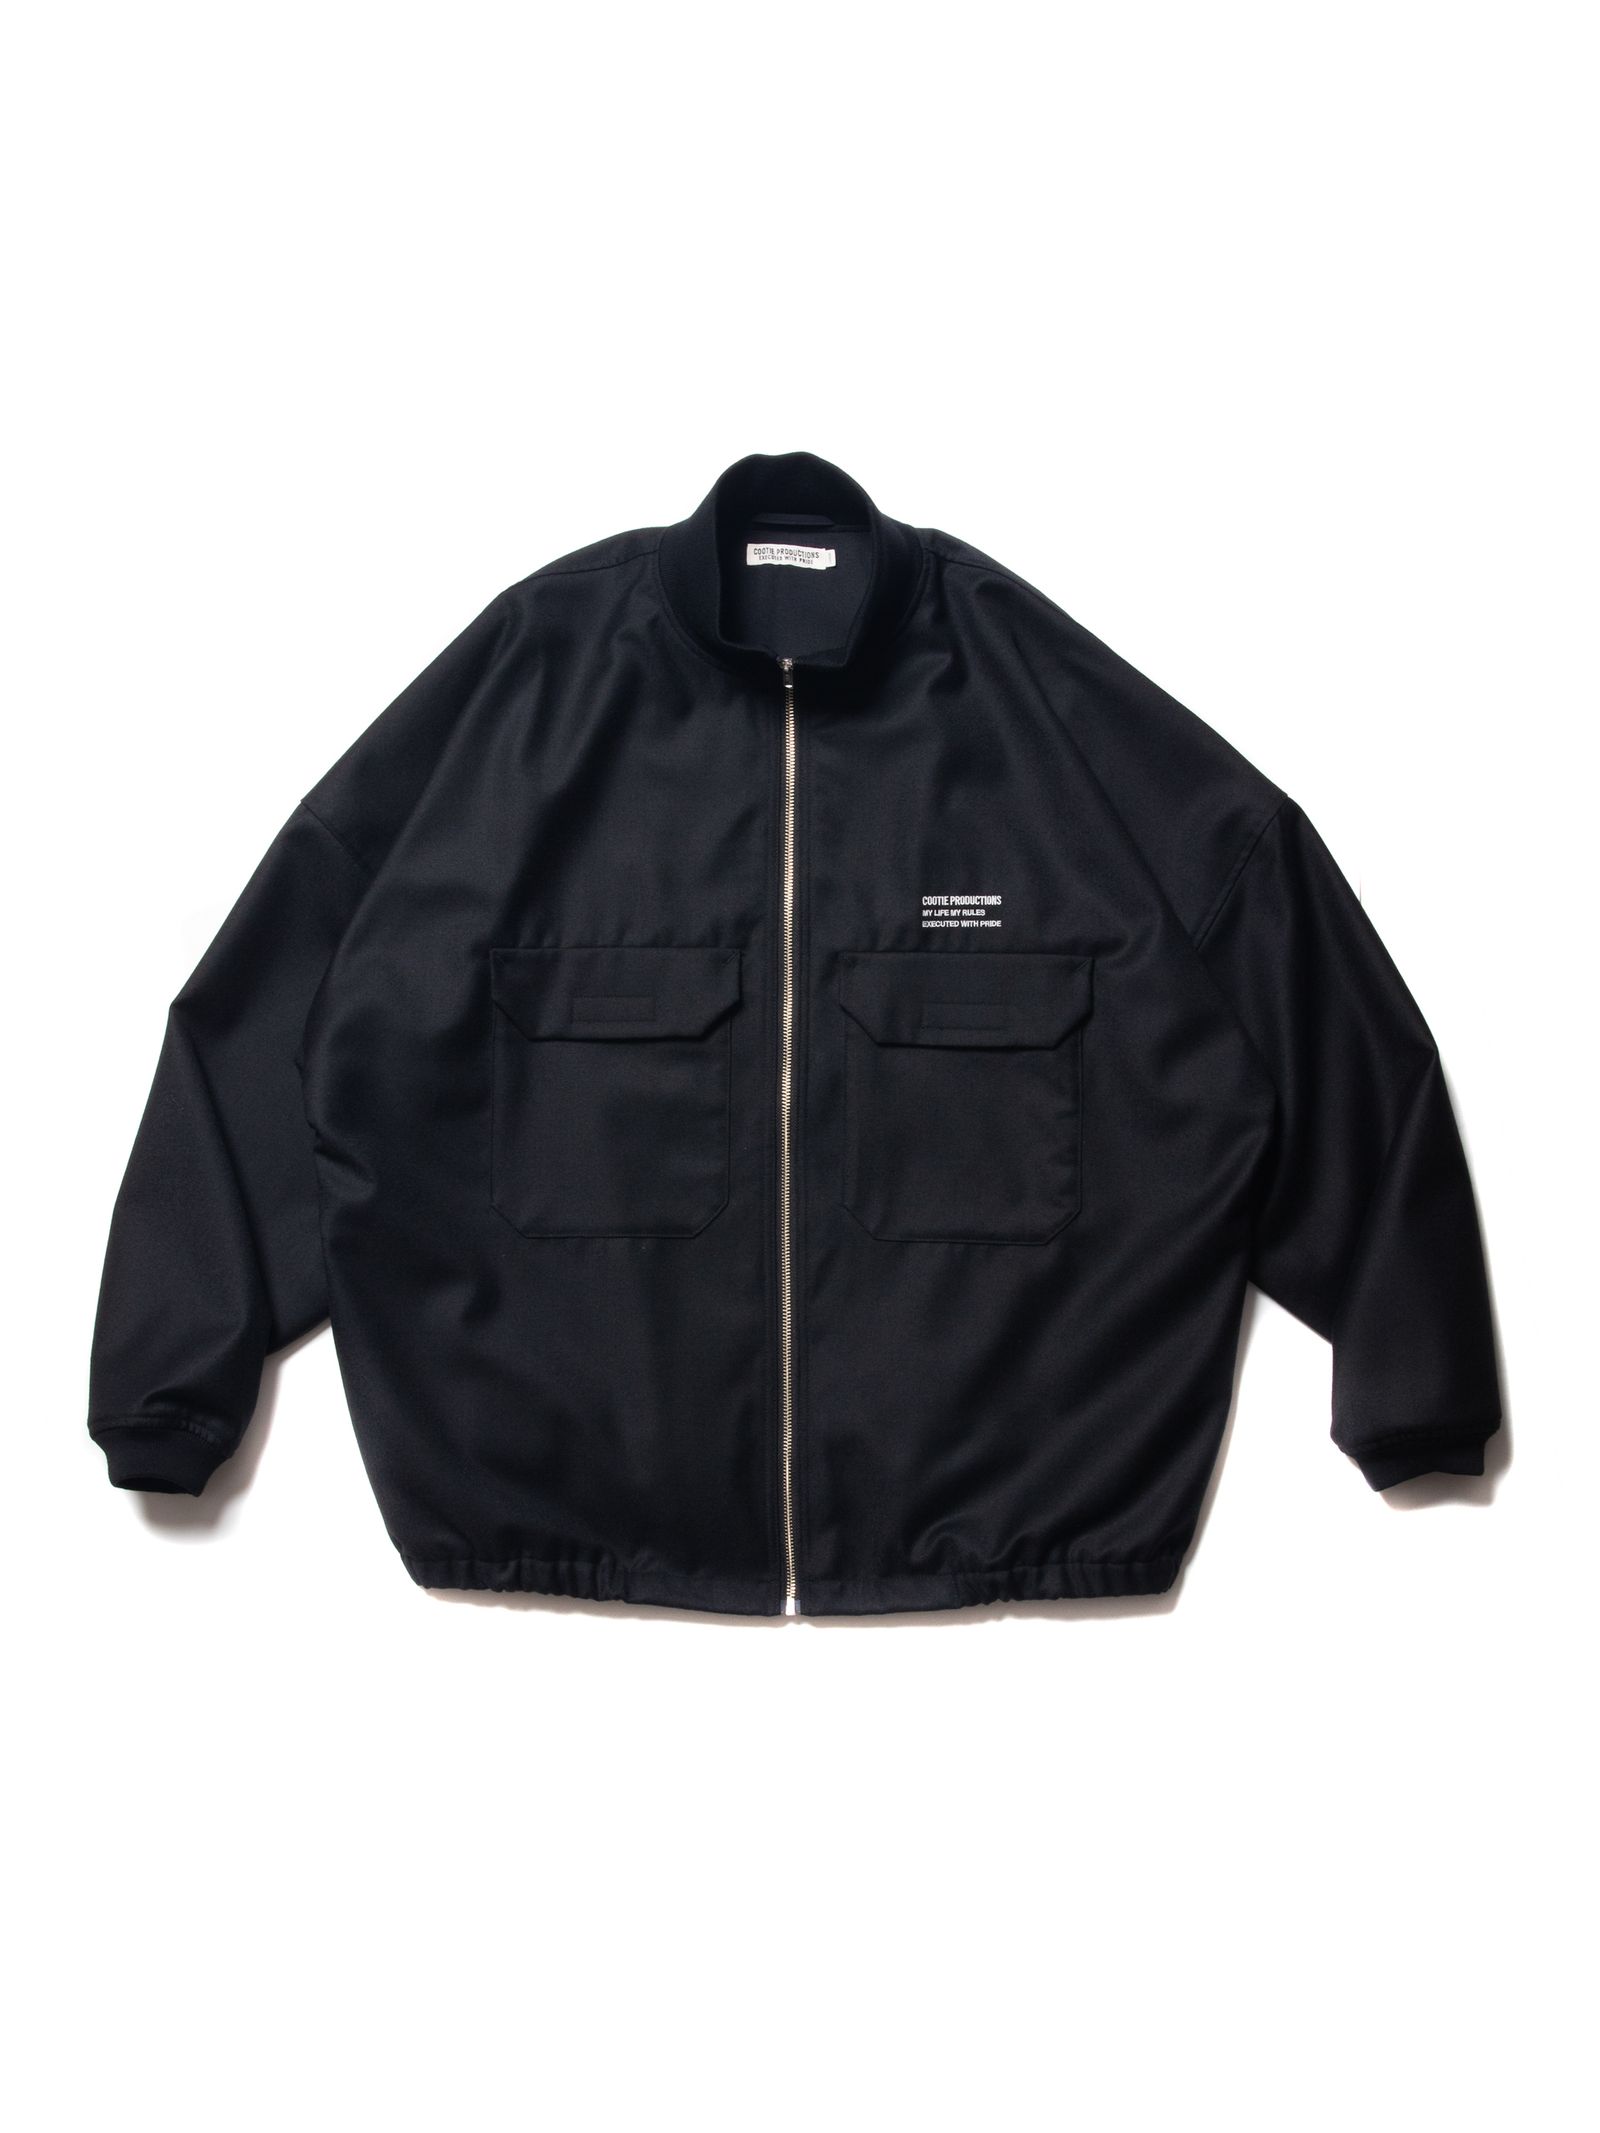 COOTIE PRODUCTIONS - WOOL SAXONY TRACK JACKET 